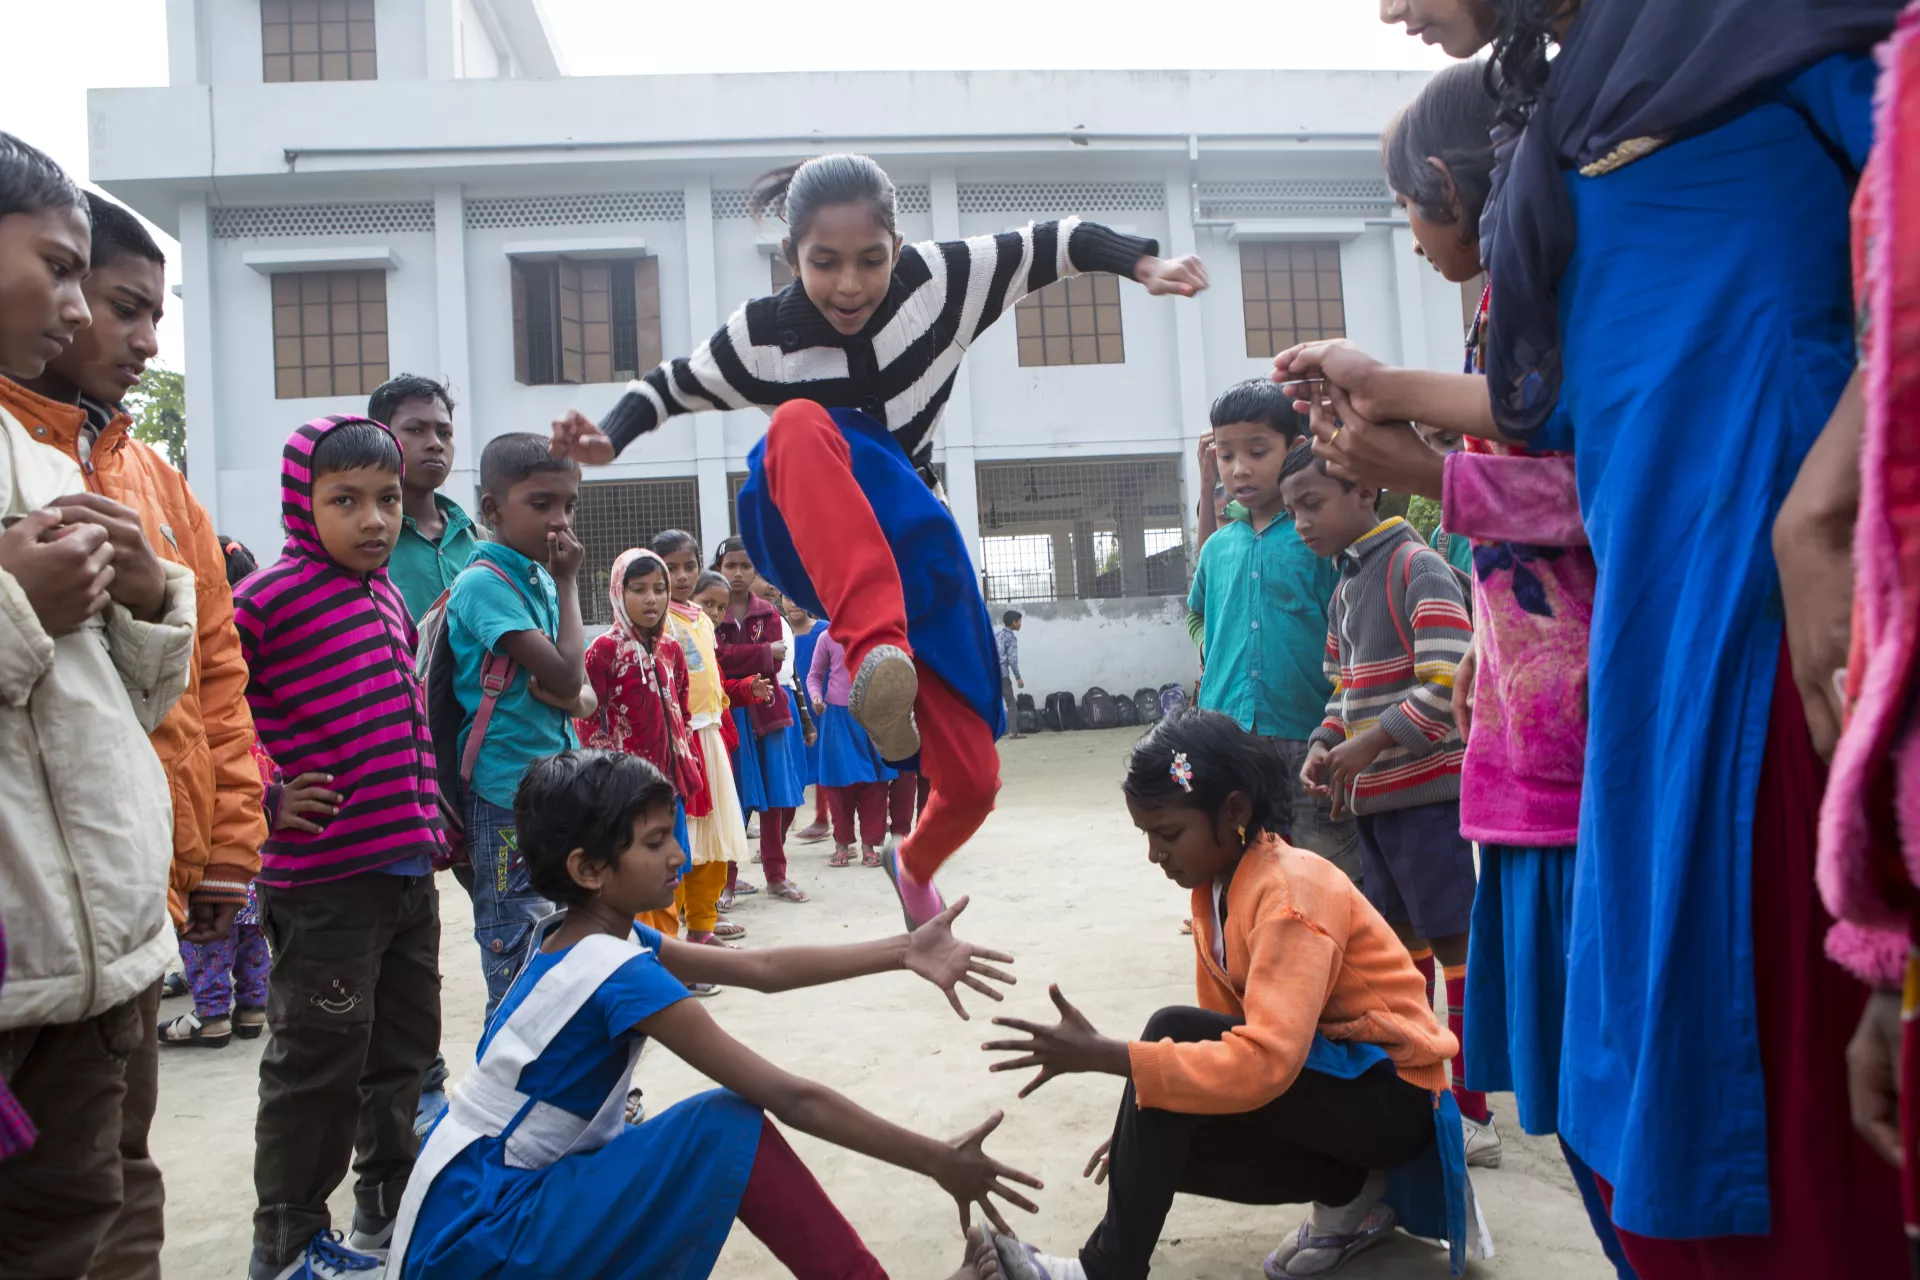 Convention on the Rights of the Child: A group of children play in a school playground in Bangladesh.